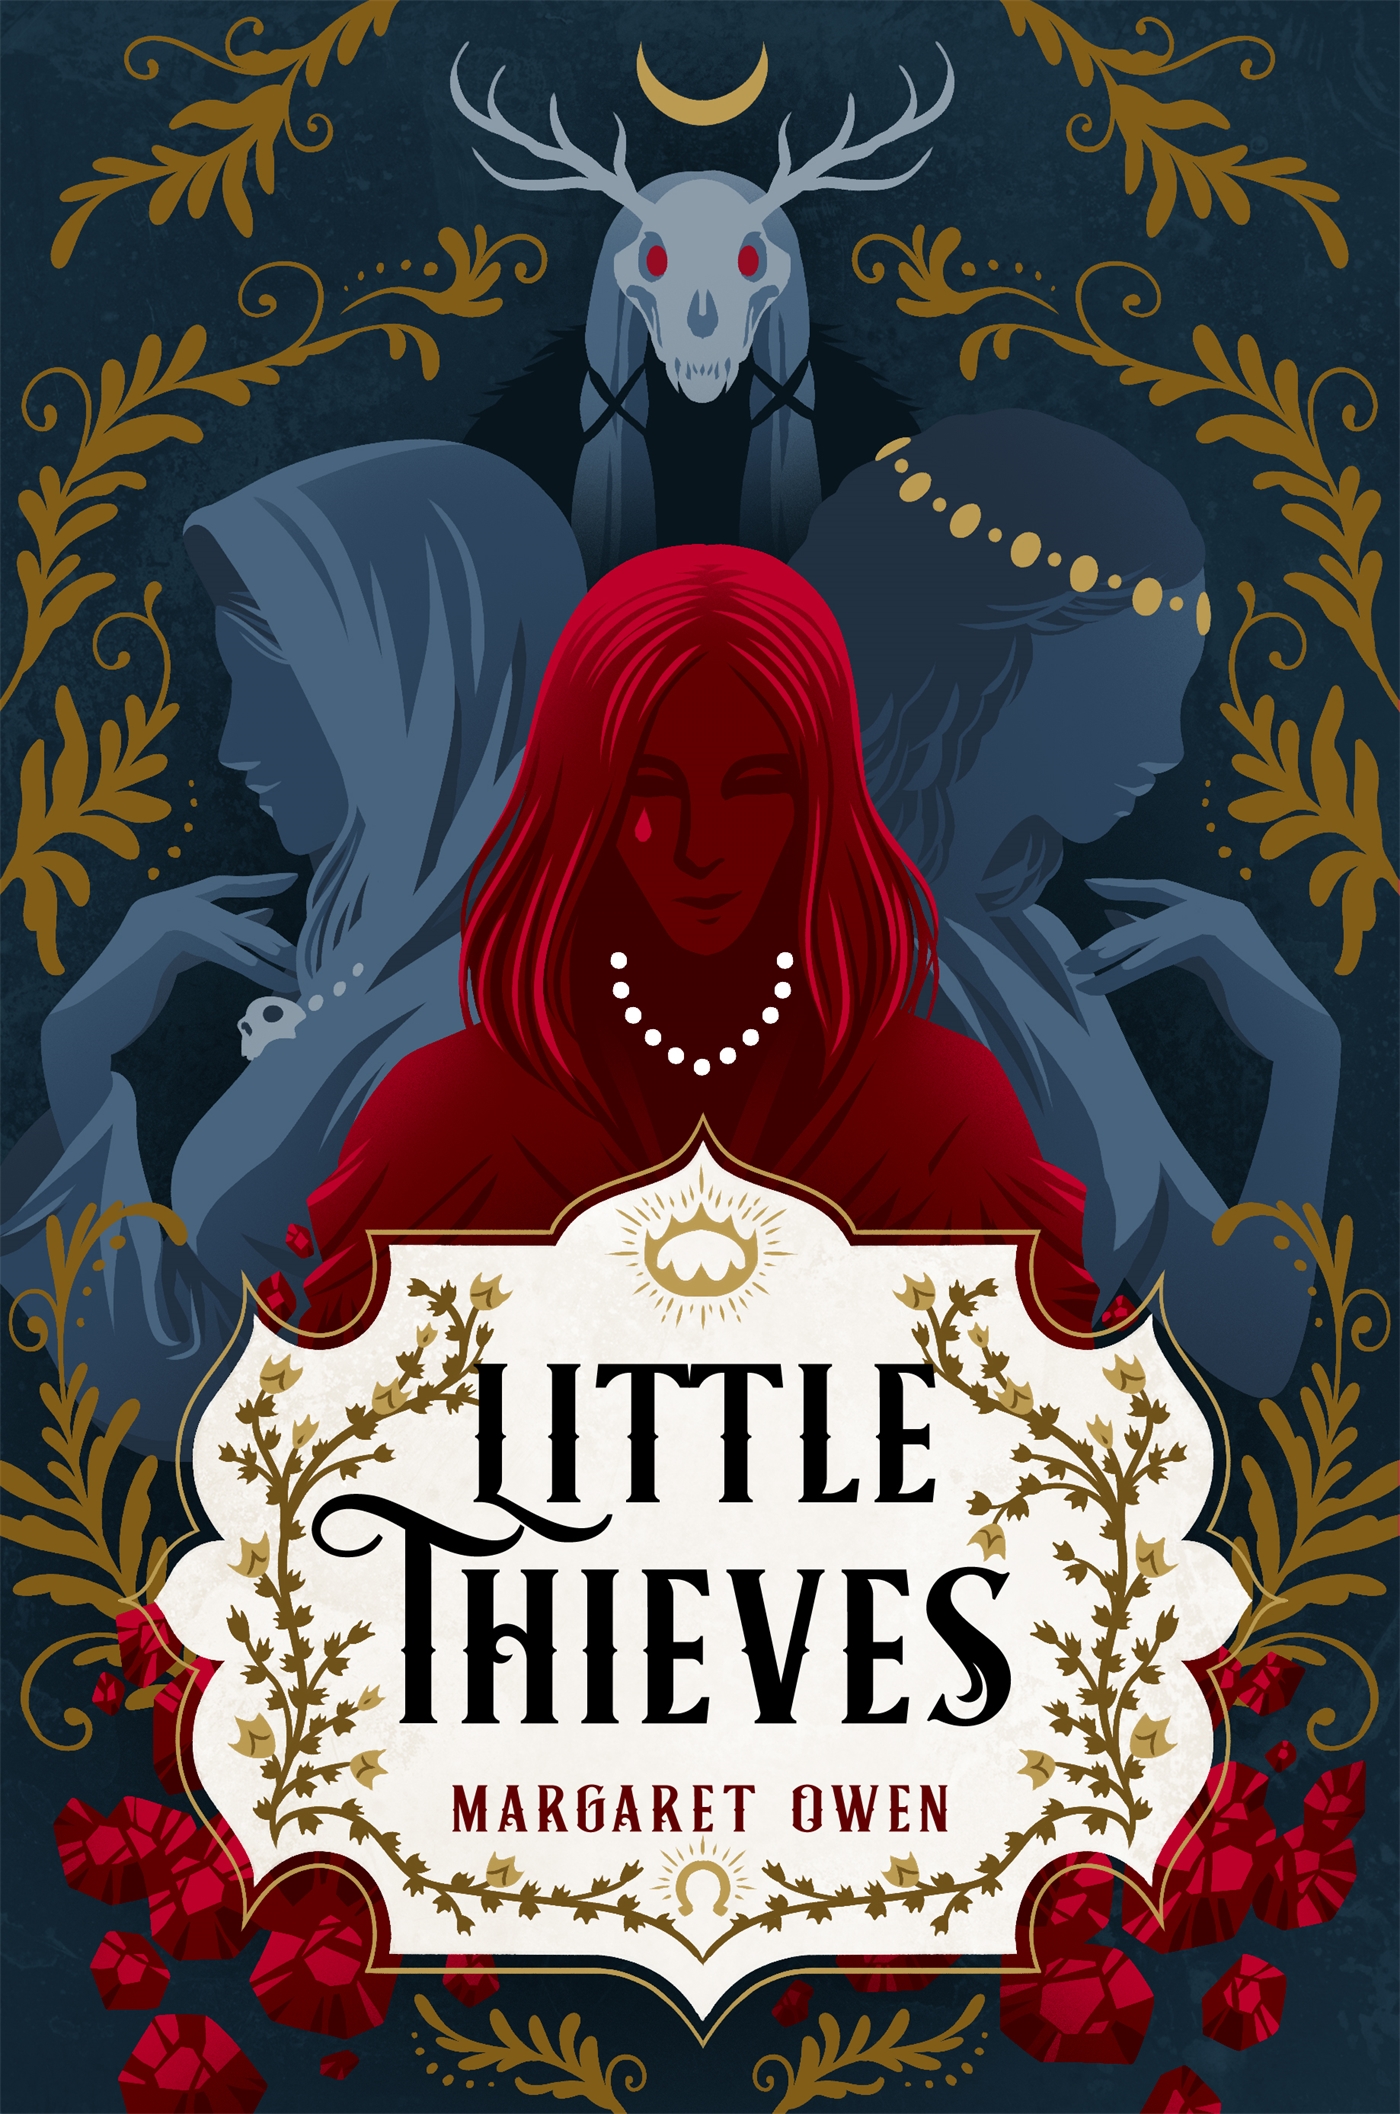 Images for Little Thieves